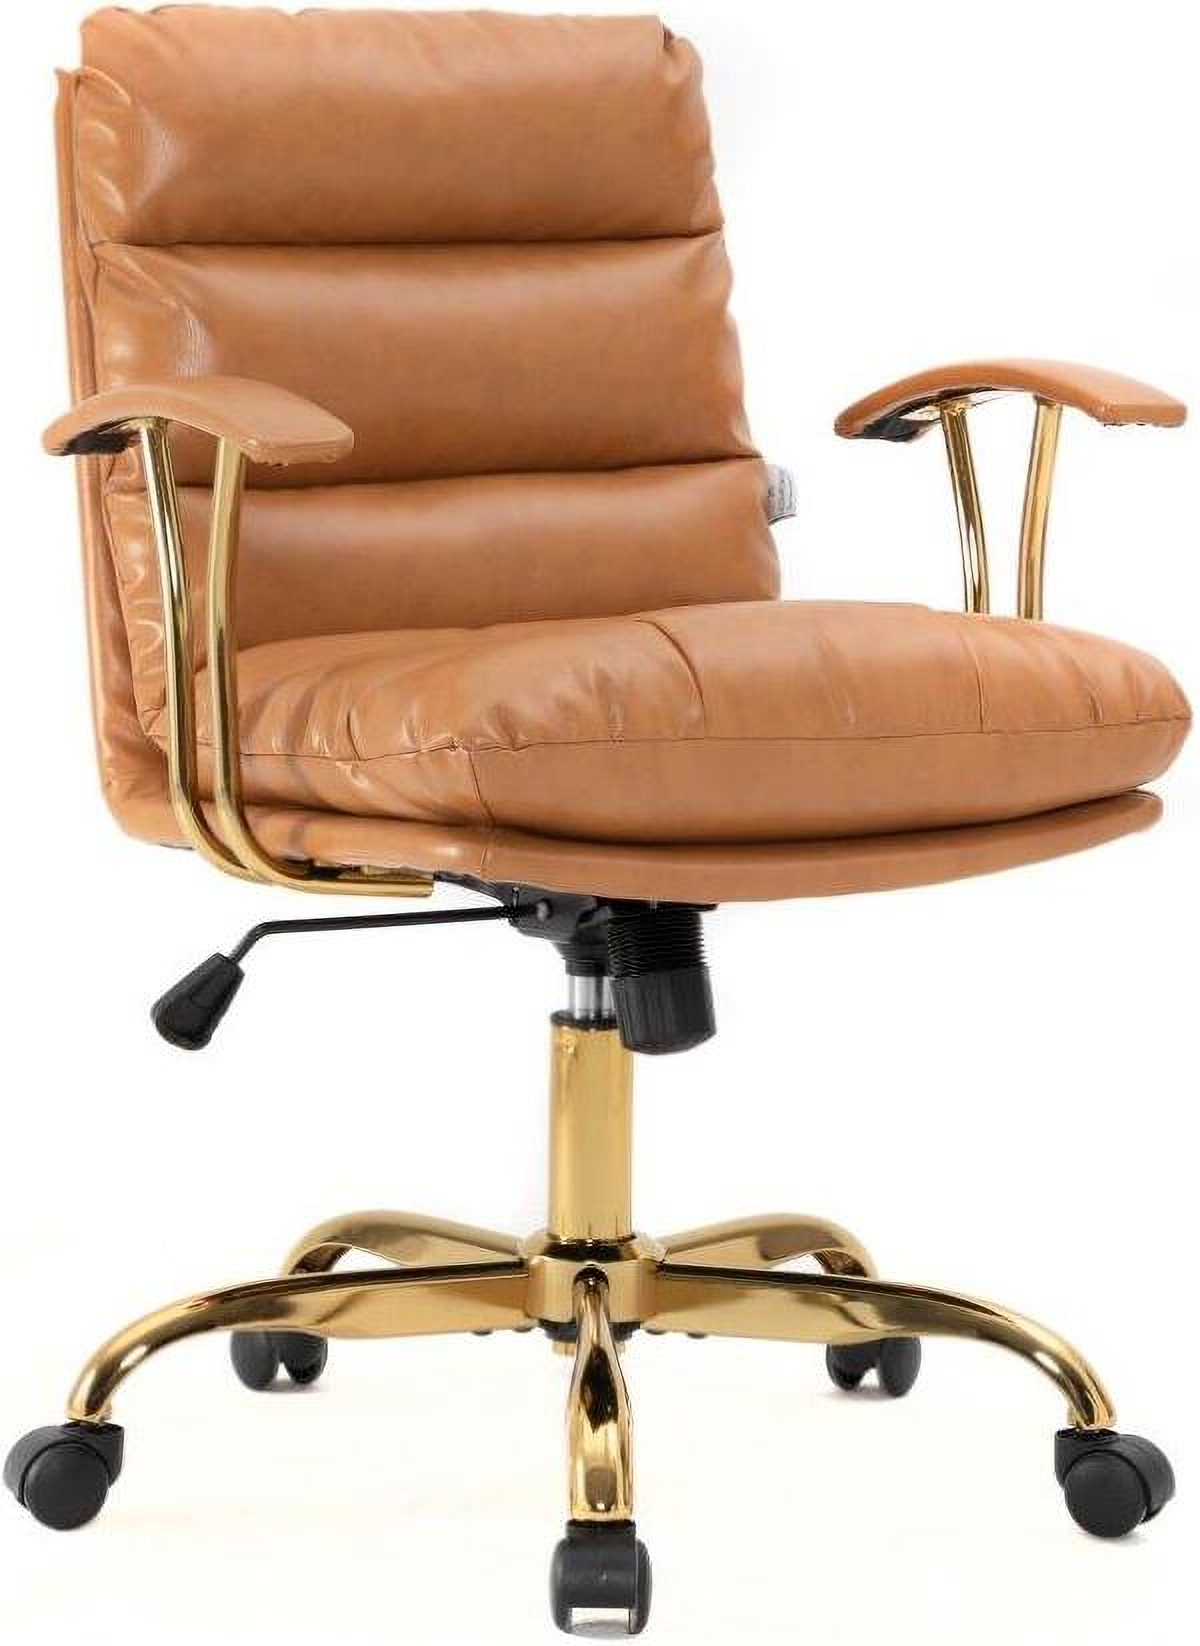 https://cdn.1stopbedrooms.com/media/catalog/product/l/e/leisuremod-regina-modern-padded-leather-adjustable-executive-office-chair-with-tilt-and-360-degree-swivel-in-saddle-brown_qb13361363.jpg